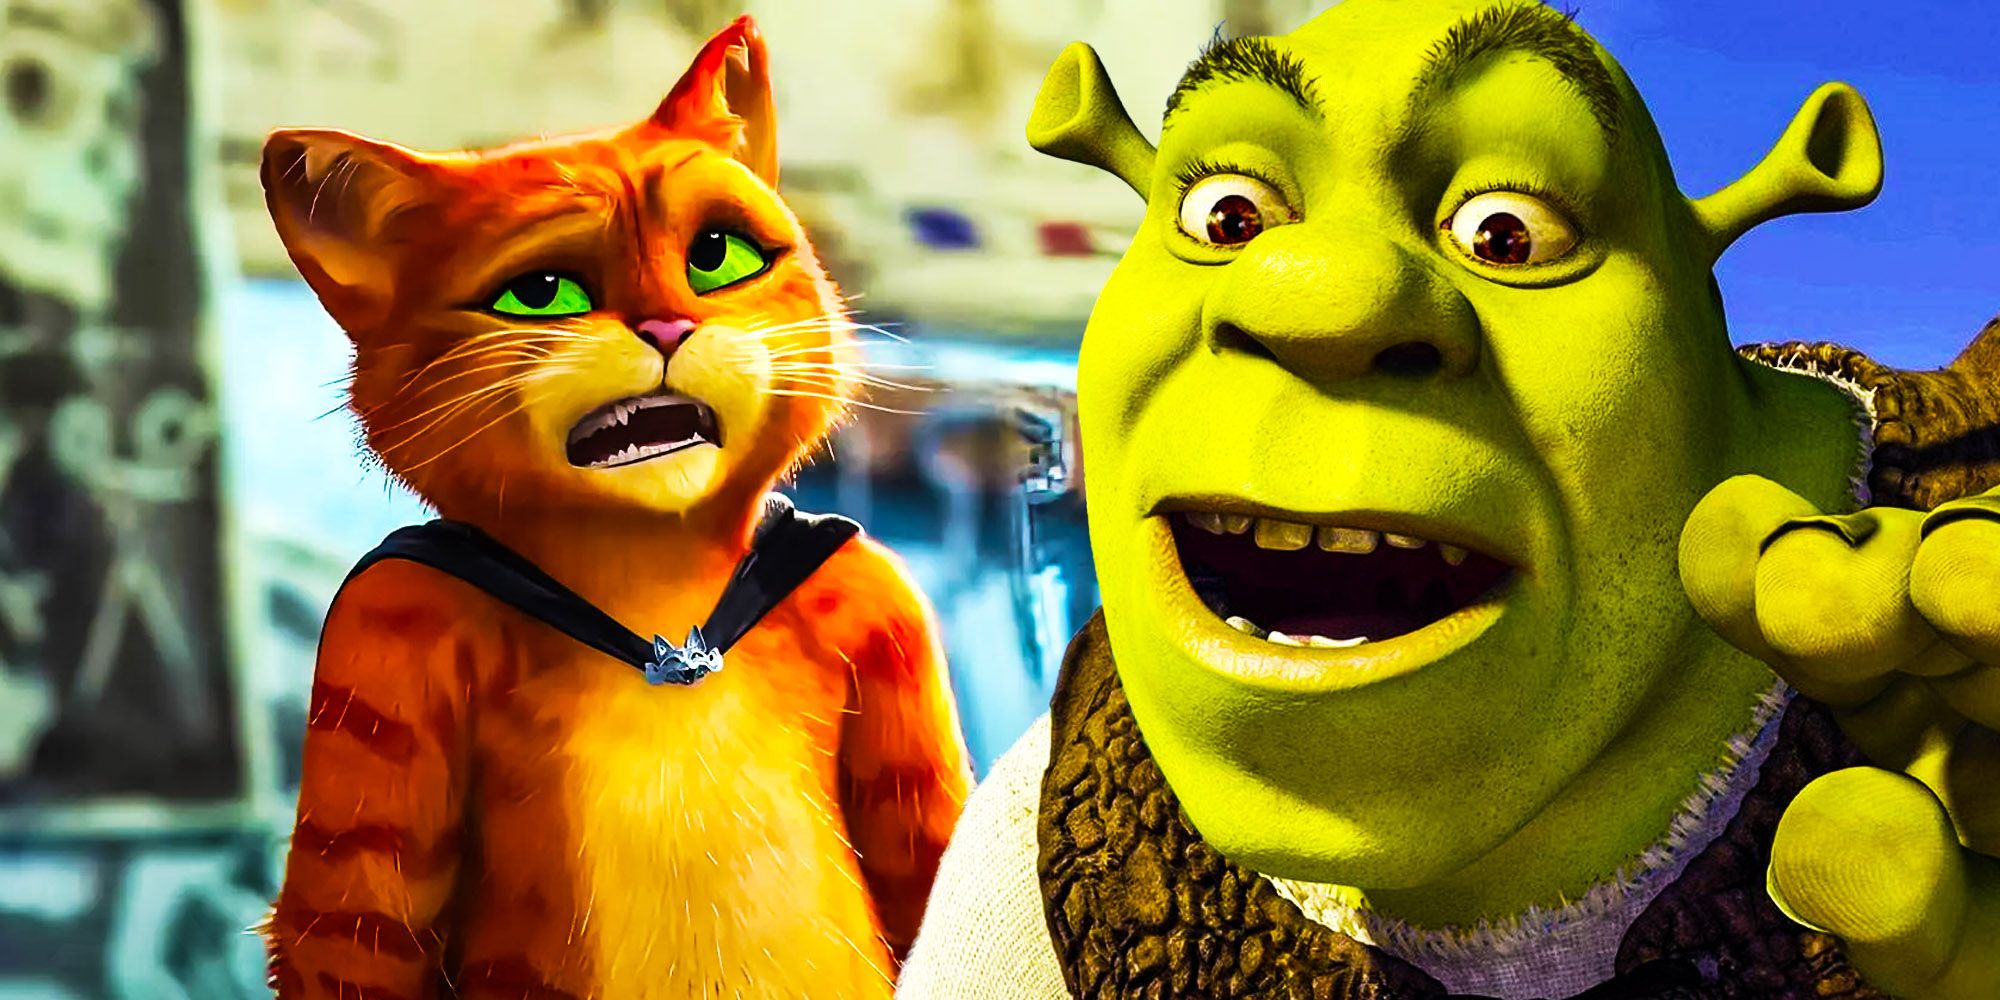 A blended image features Puss in Boots and Shrek.